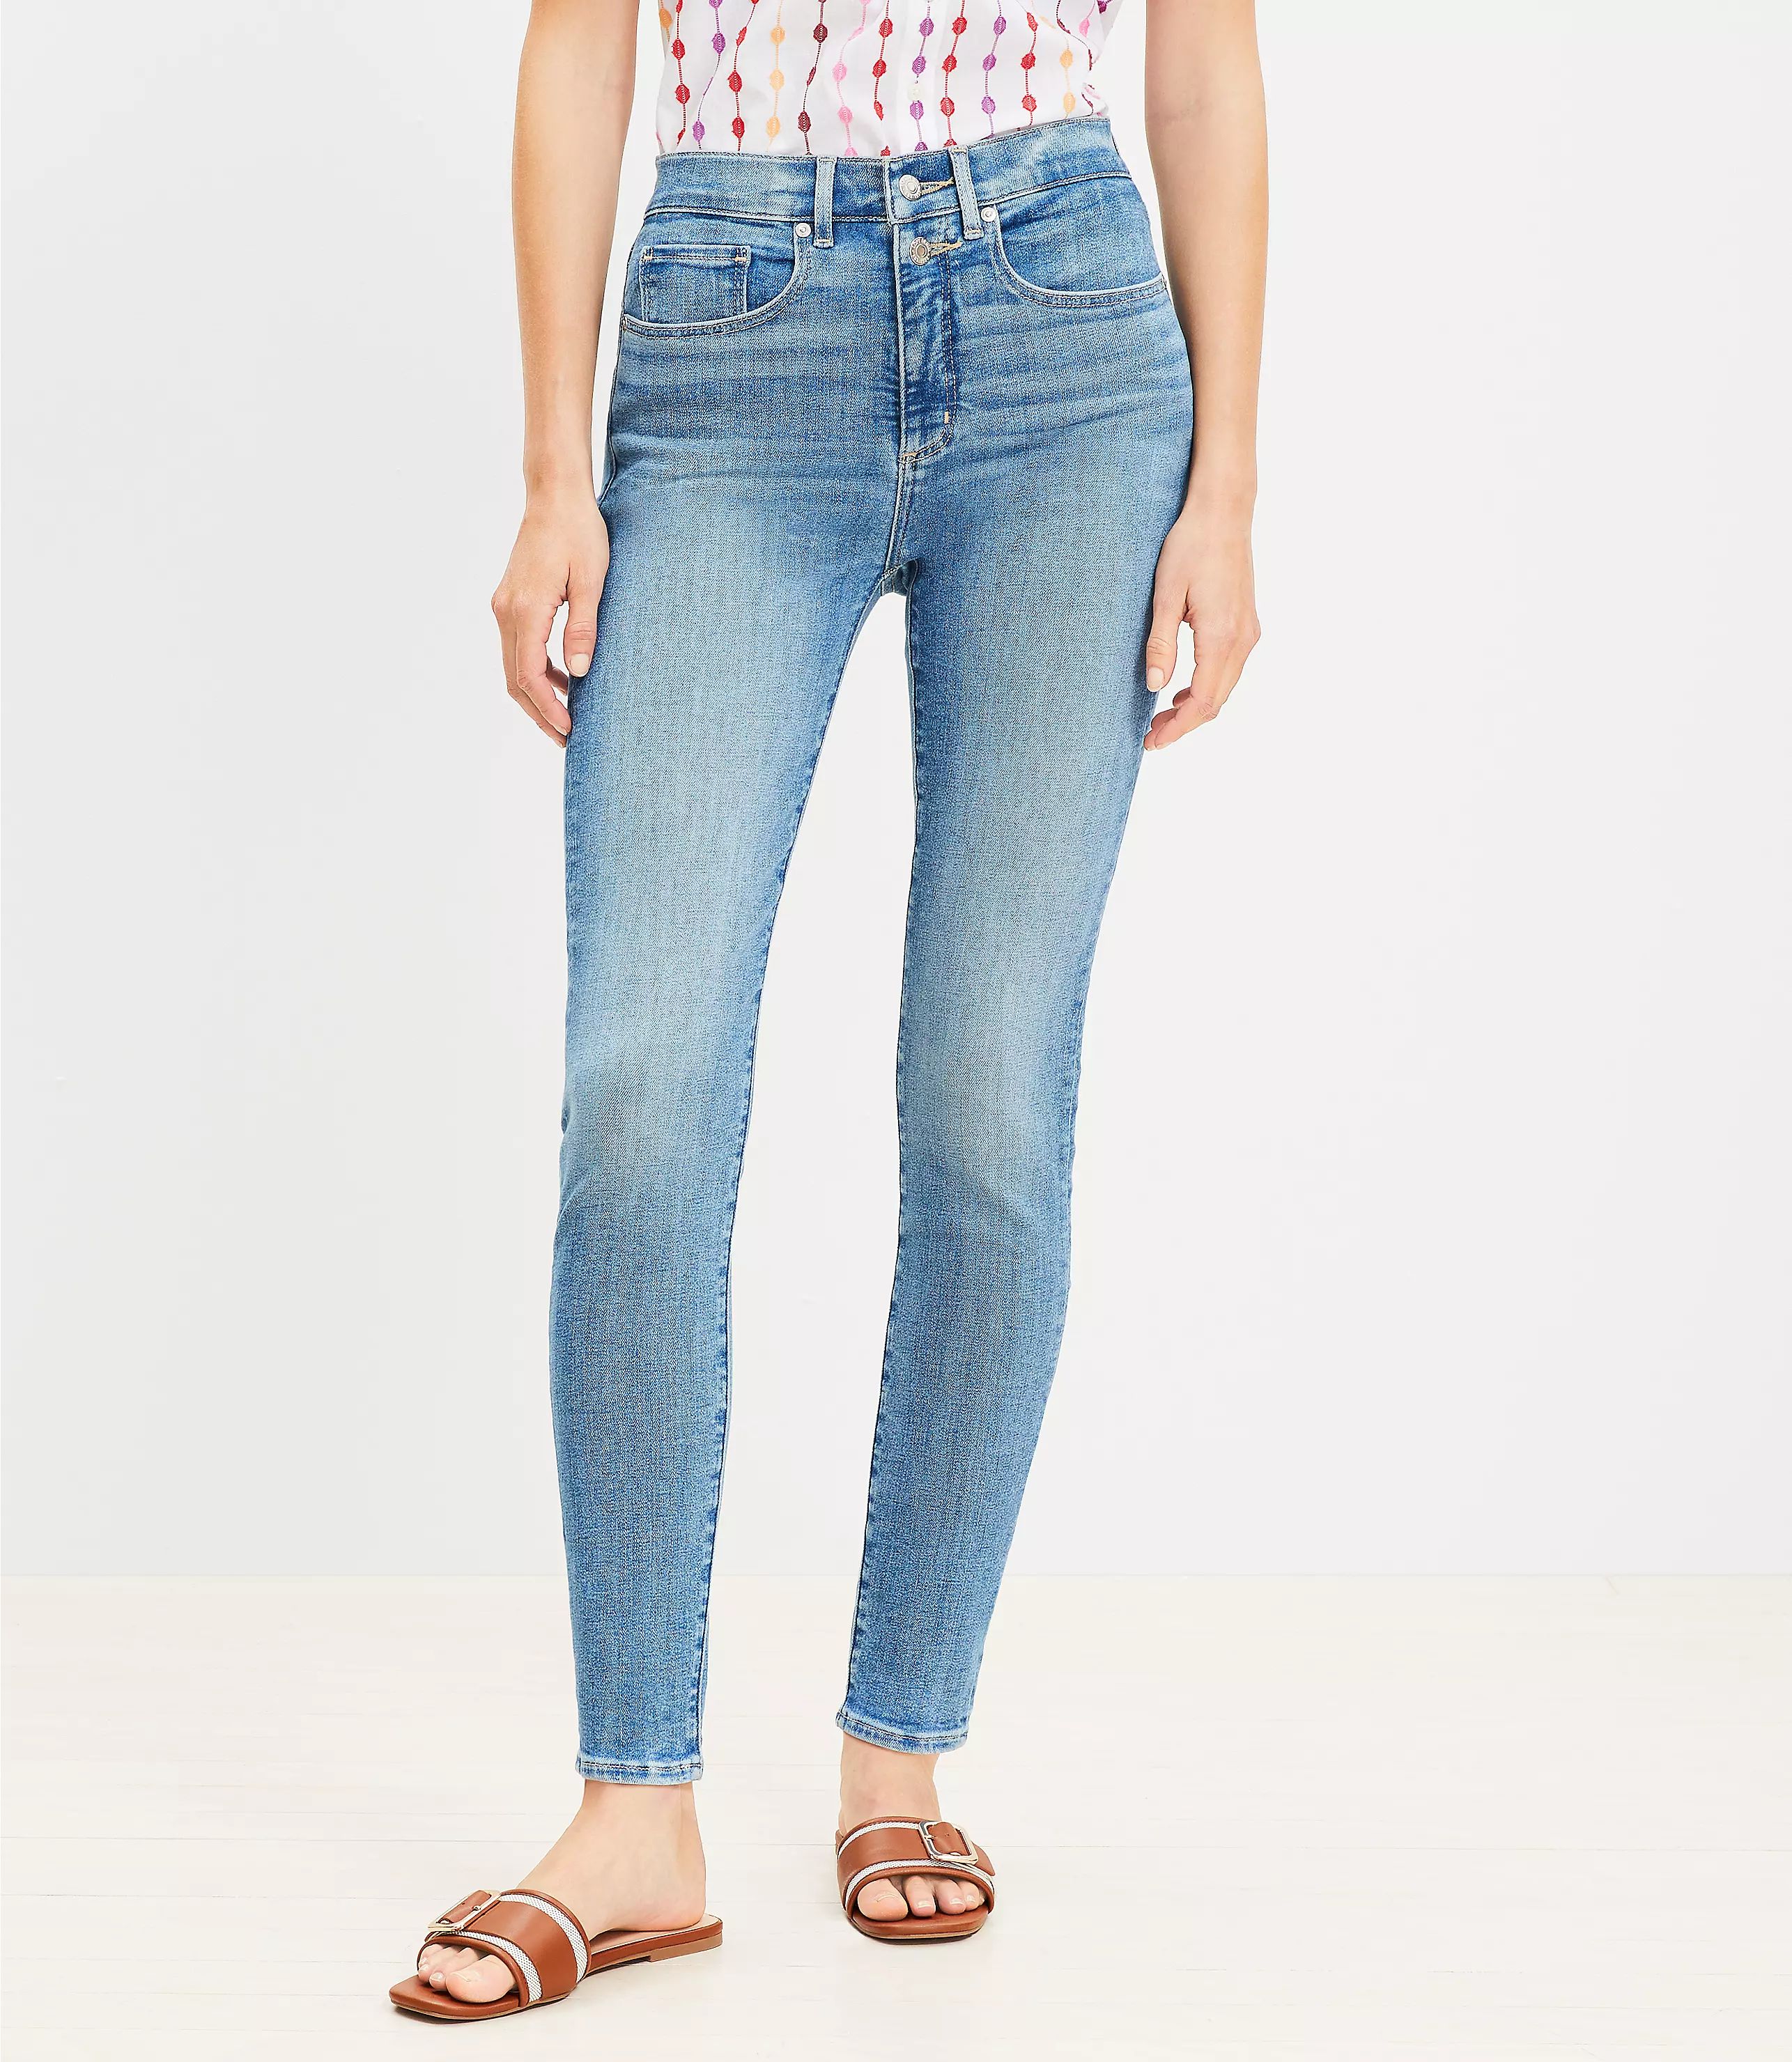 Double Shank High Rise Skinny Jeans in Luxe Medium Wash | LOFT